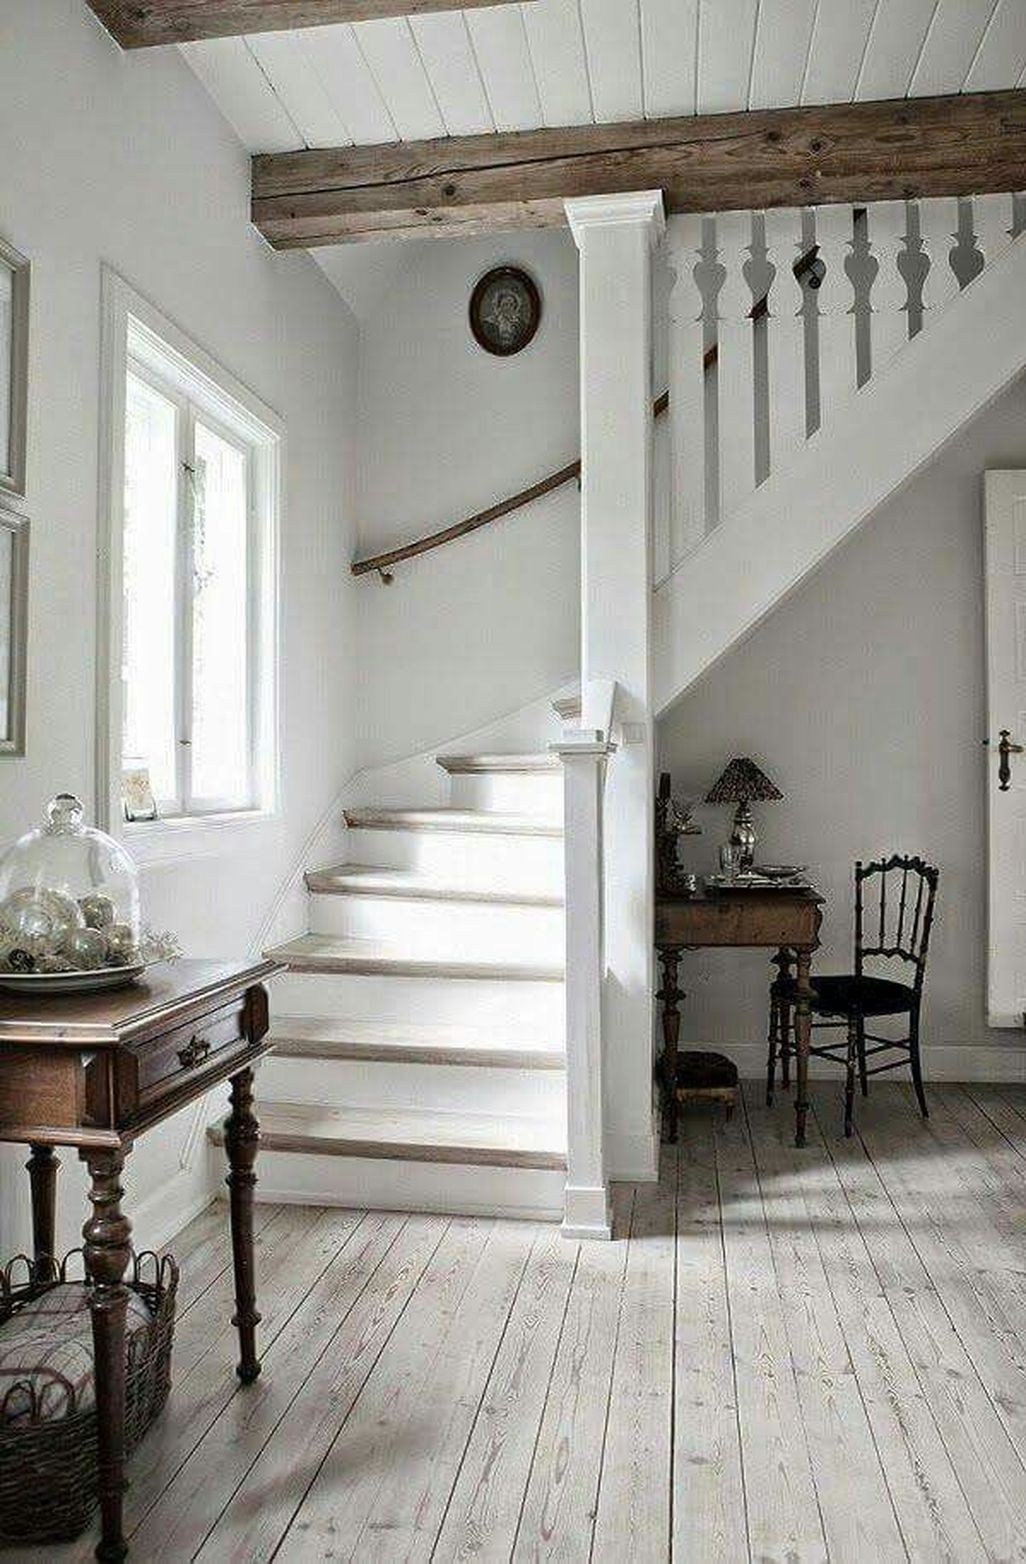 48 Lovely Rustic Hallway To Copy Now - TREND4HOMY